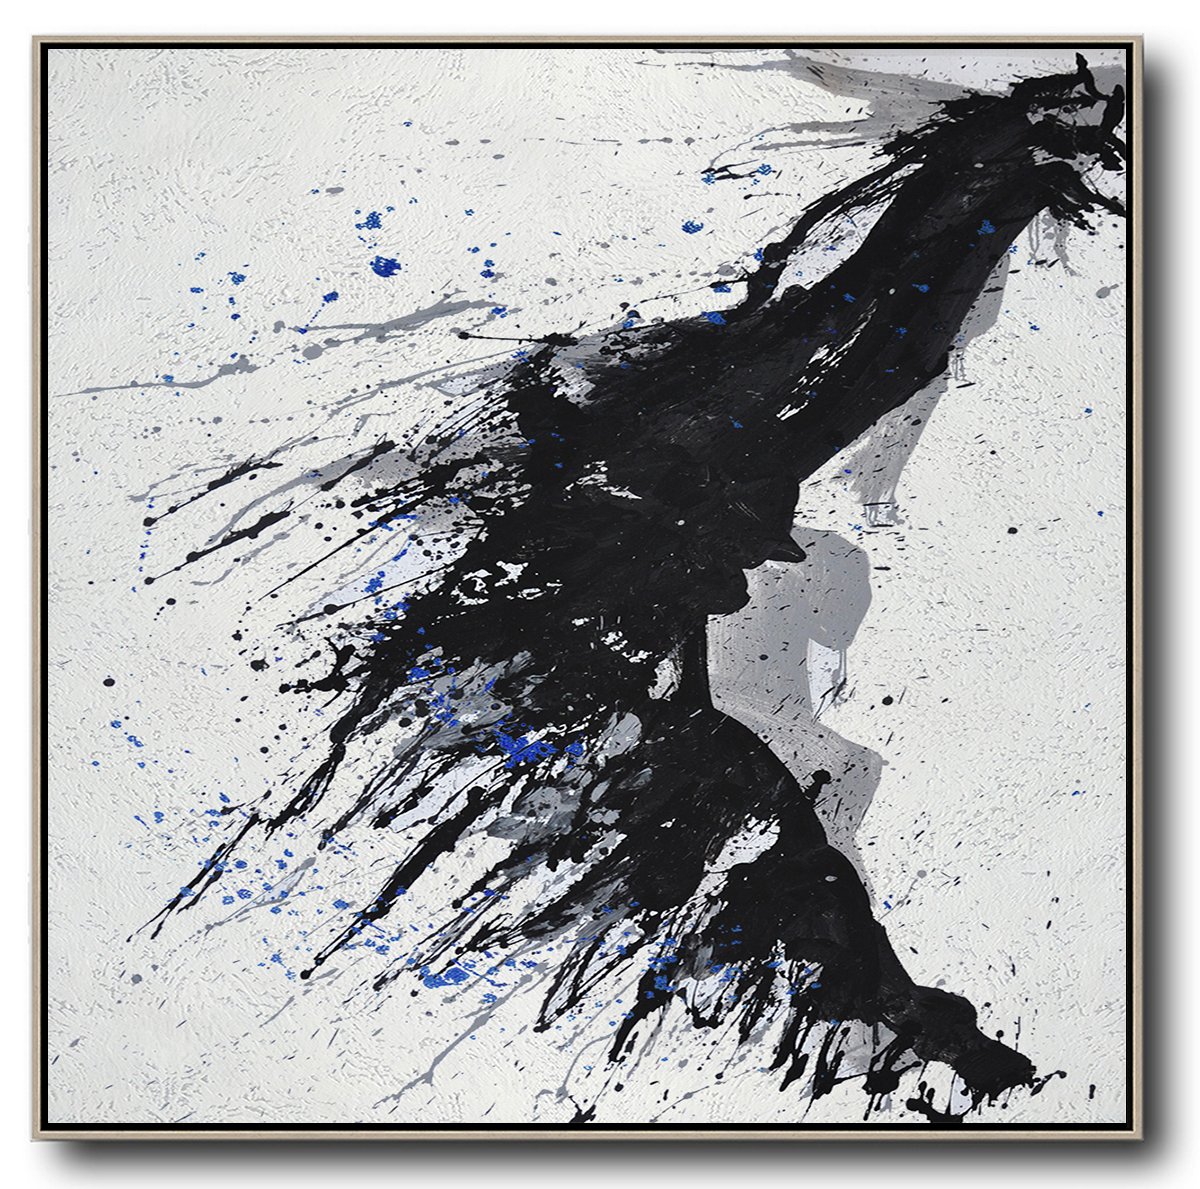 Oversized Canvas Art On Canvas,Minimalist Drip Painting On Canvas, Black, White, Grey, Blue - Large Contemporary Art Canvas Painting